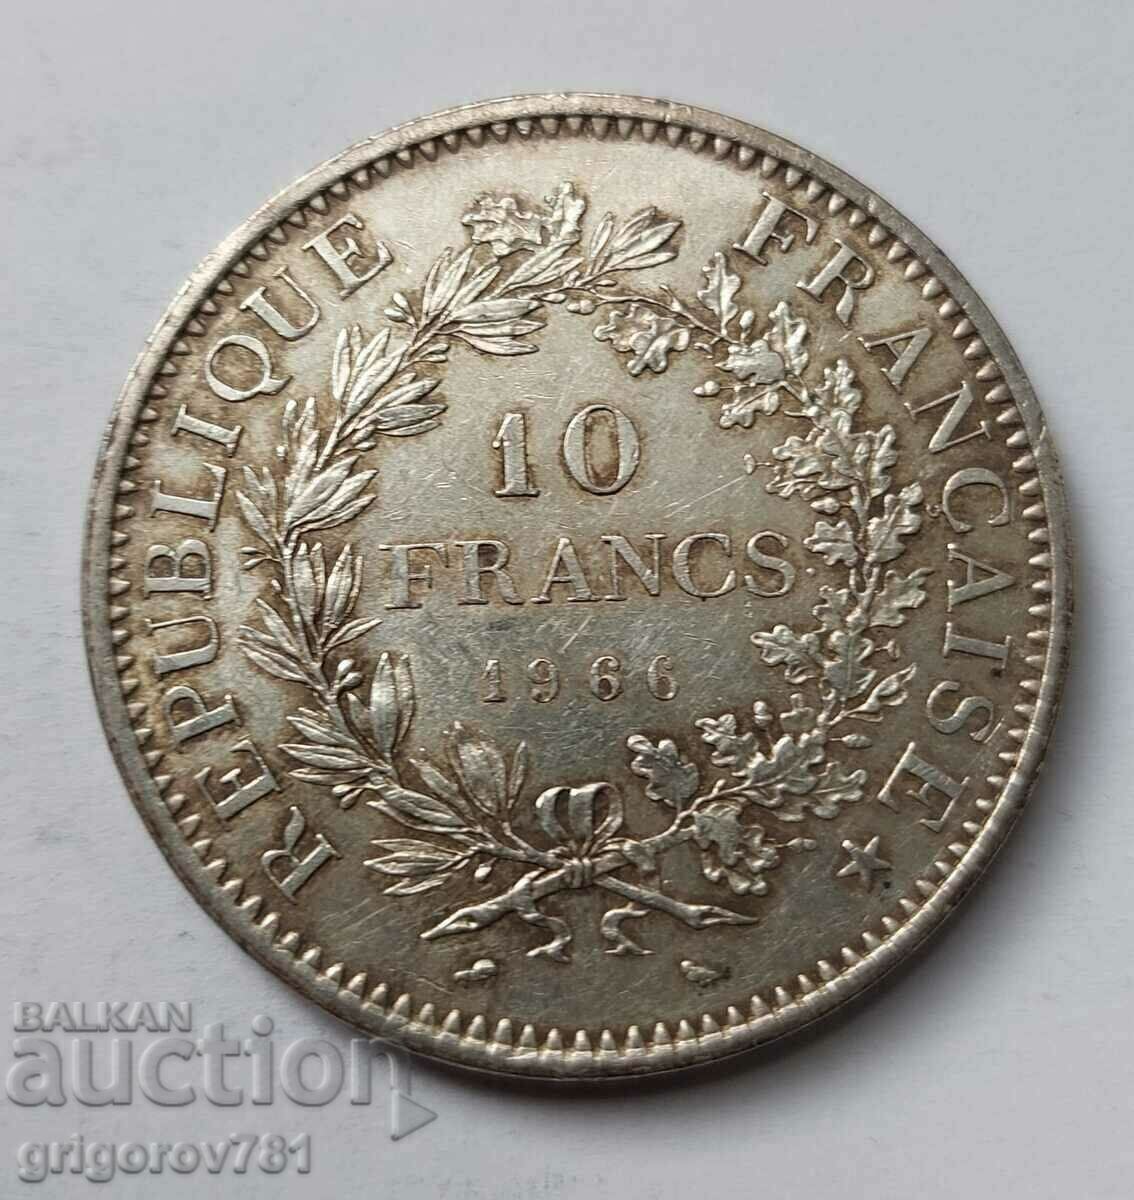 10 Francs Silver France 1966 - Silver Coin #60